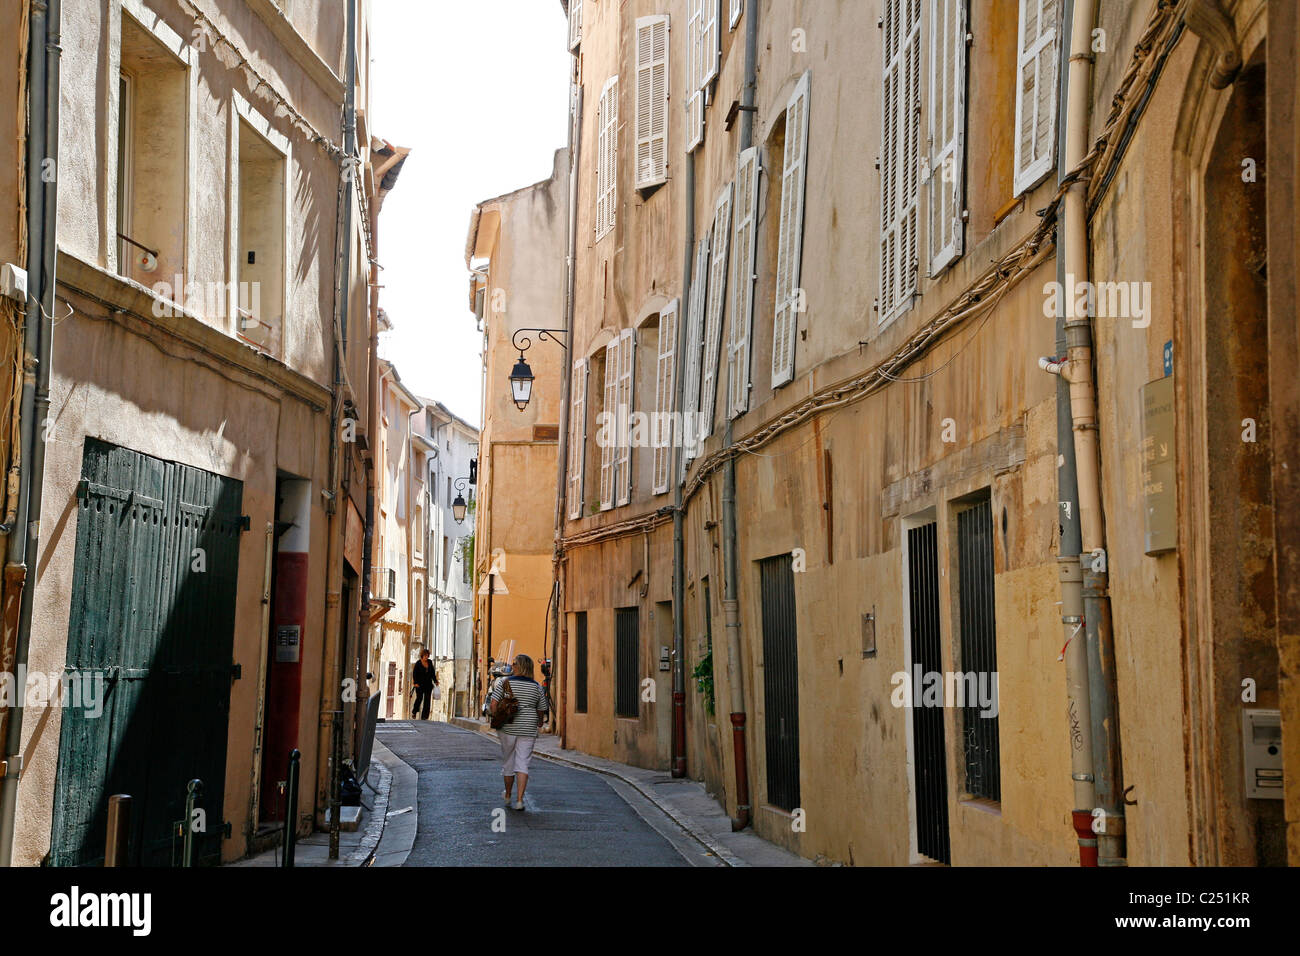 Street in the Vieil Aix the old quarter of Aix en Provence, Bouches du Rhone,  Provence, France. Stock Photo